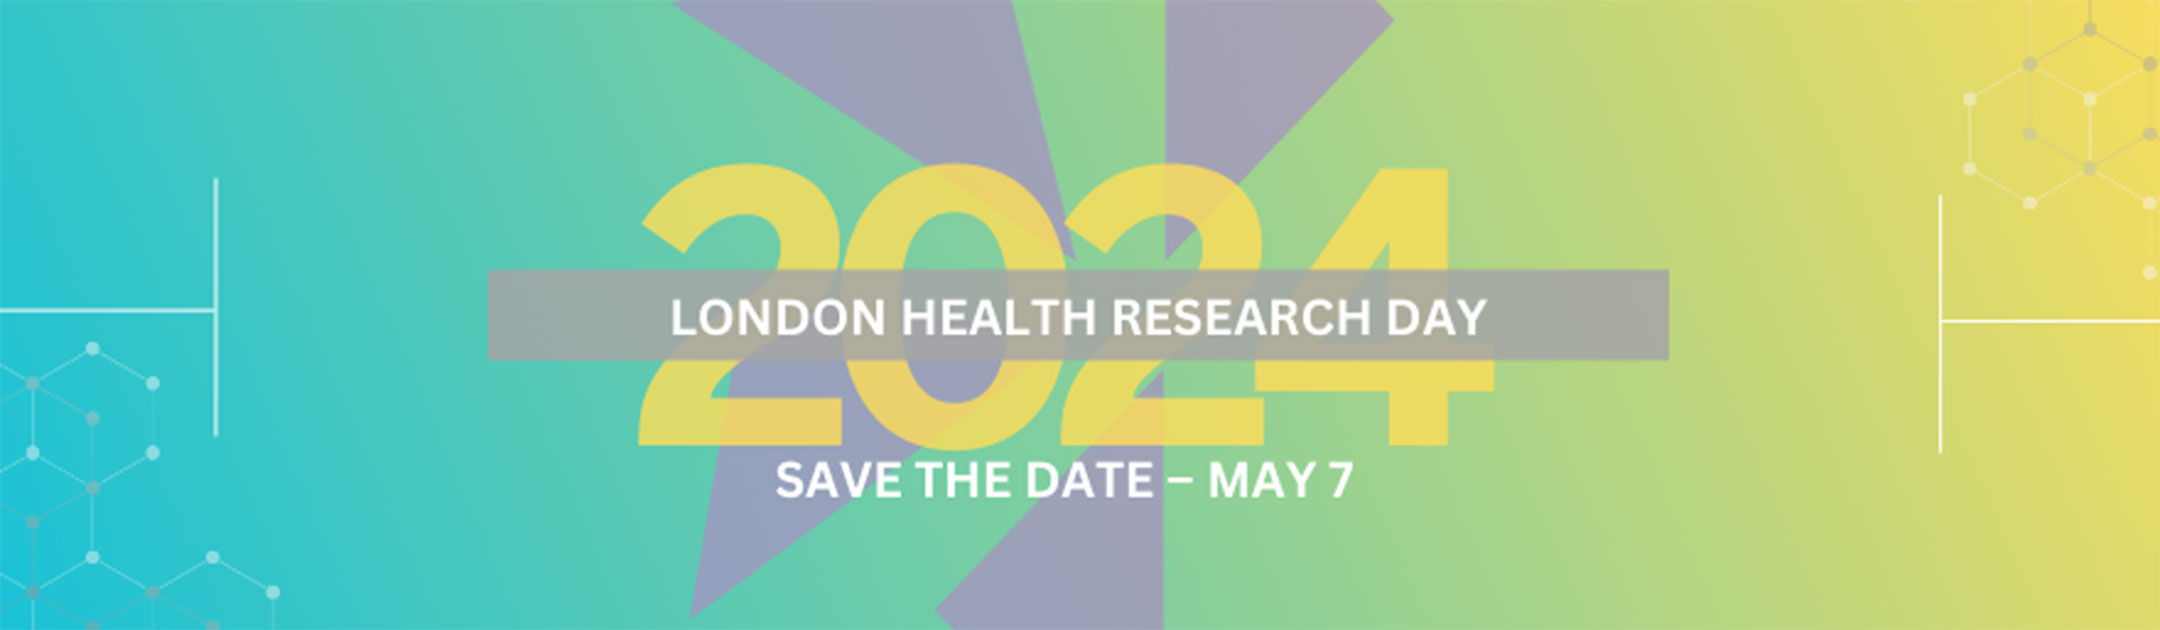 London Health Research Day 2024 Save the Date